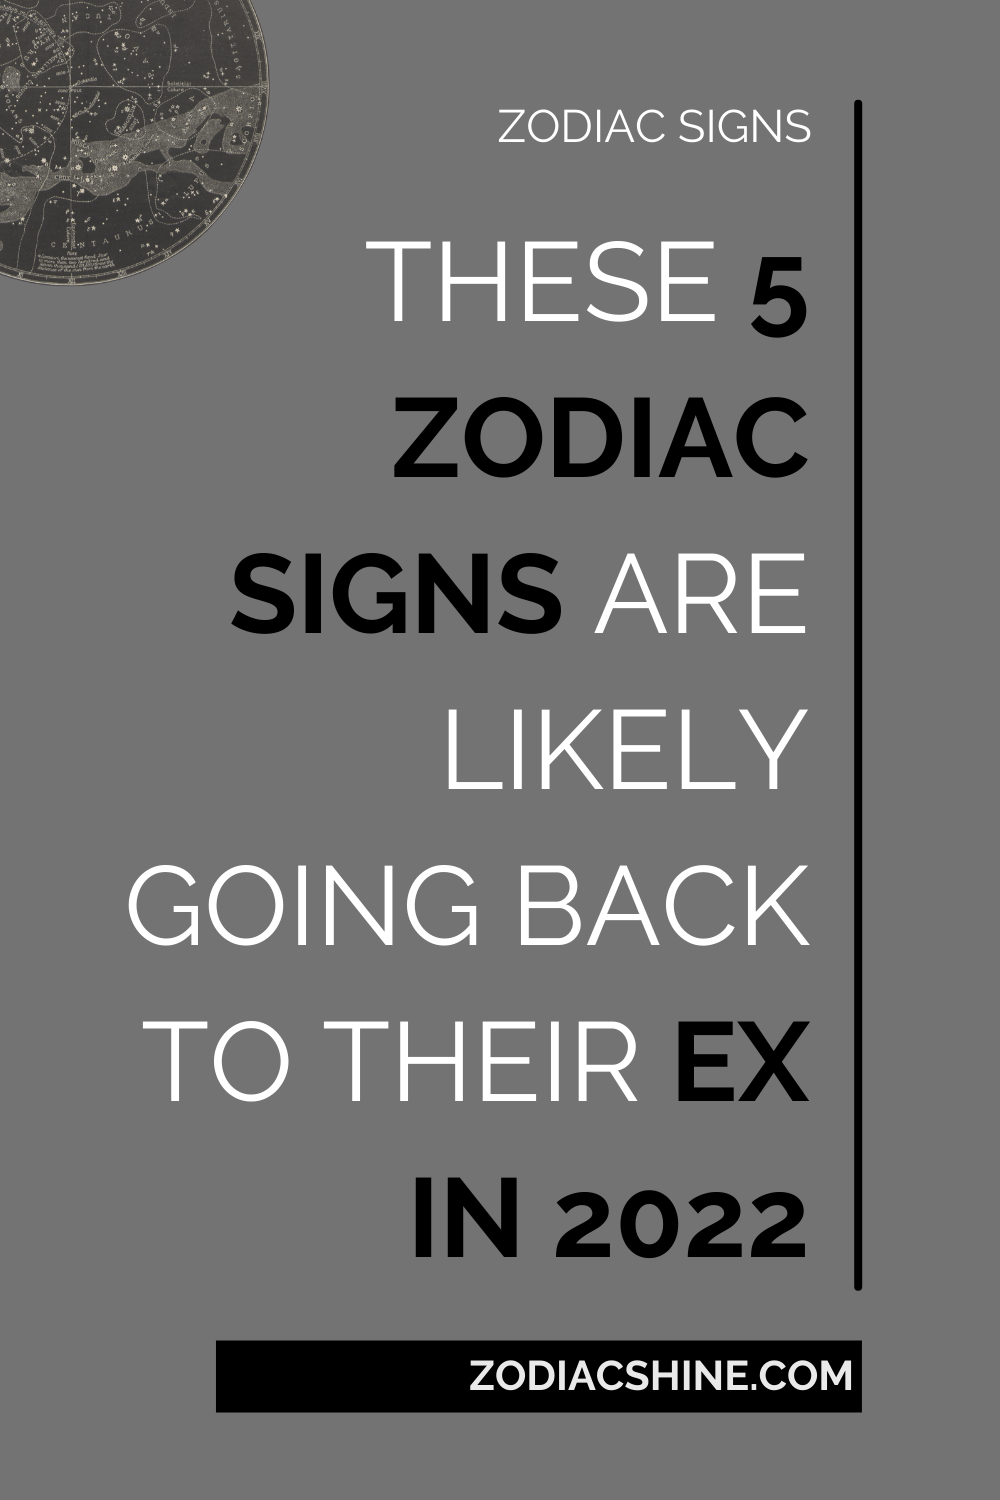 These 5 Zodiac Signs Are Likely Going Back To Their Ex In 2022